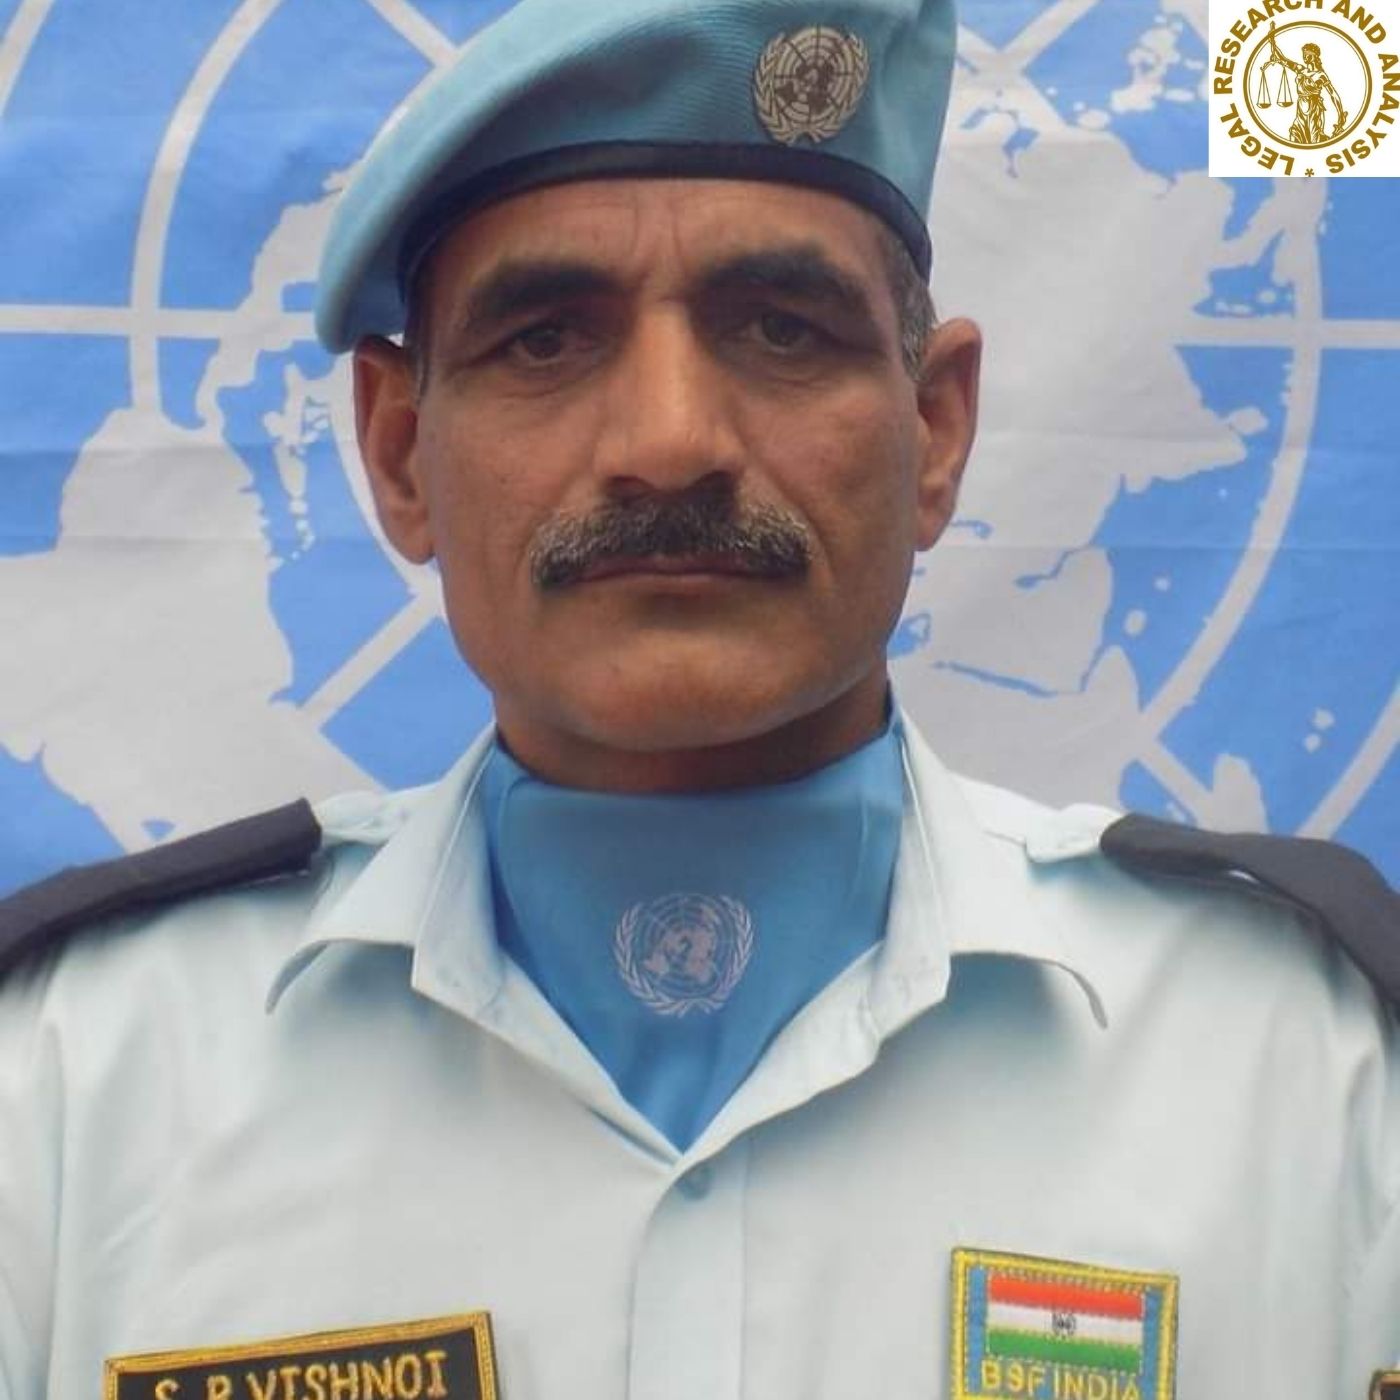 Two BSF personnel serving on United Nations peacekeeping duty in the Congo were killed.